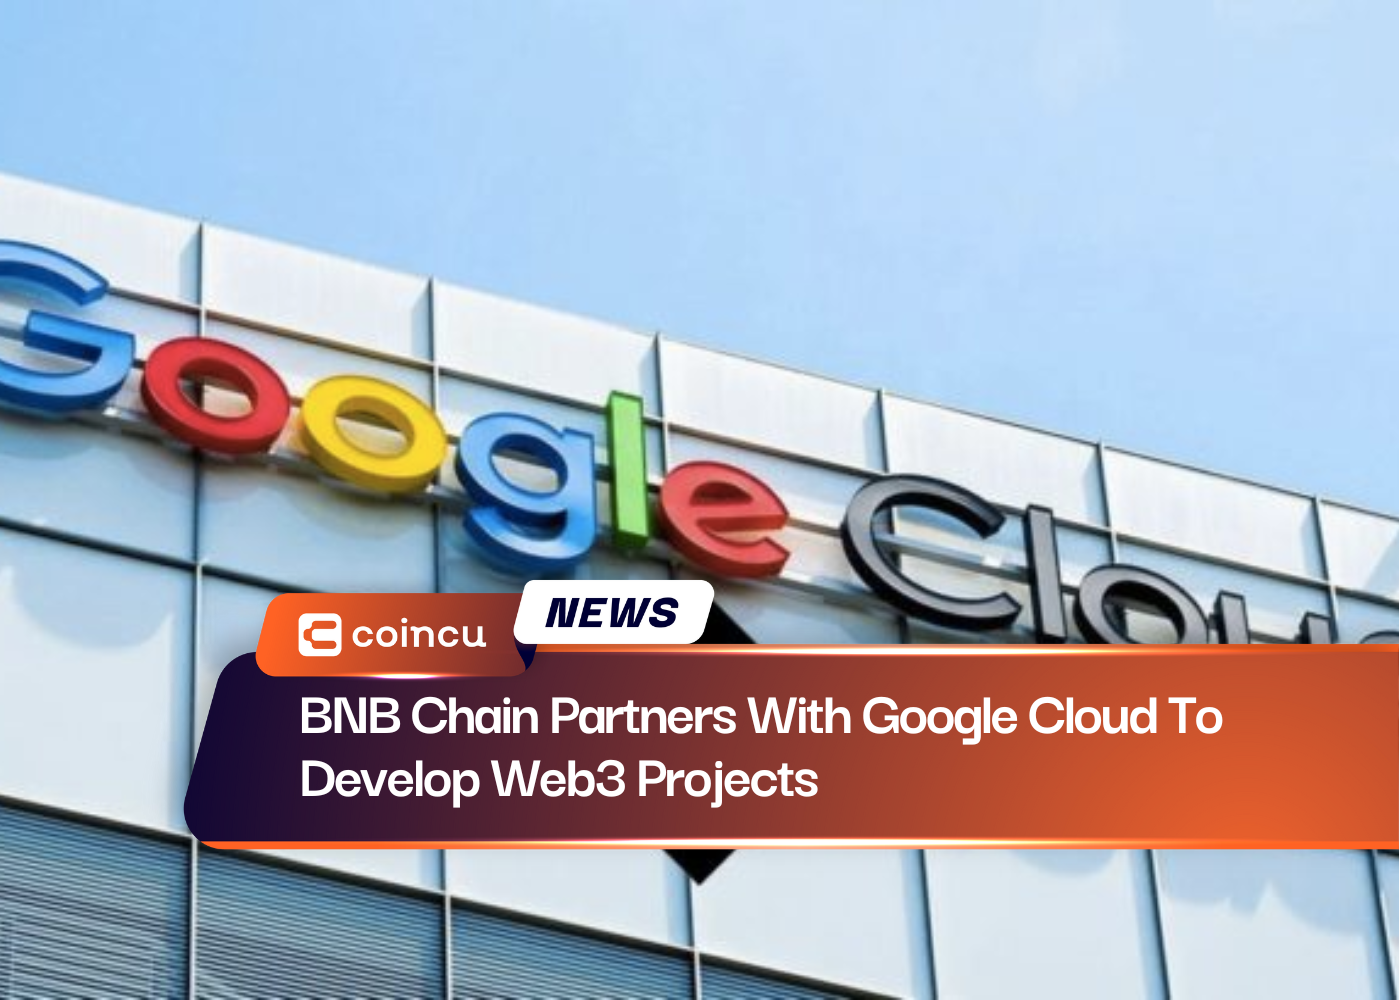 BNB Chain Partners With Google Cloud To Develop Web3 Projects